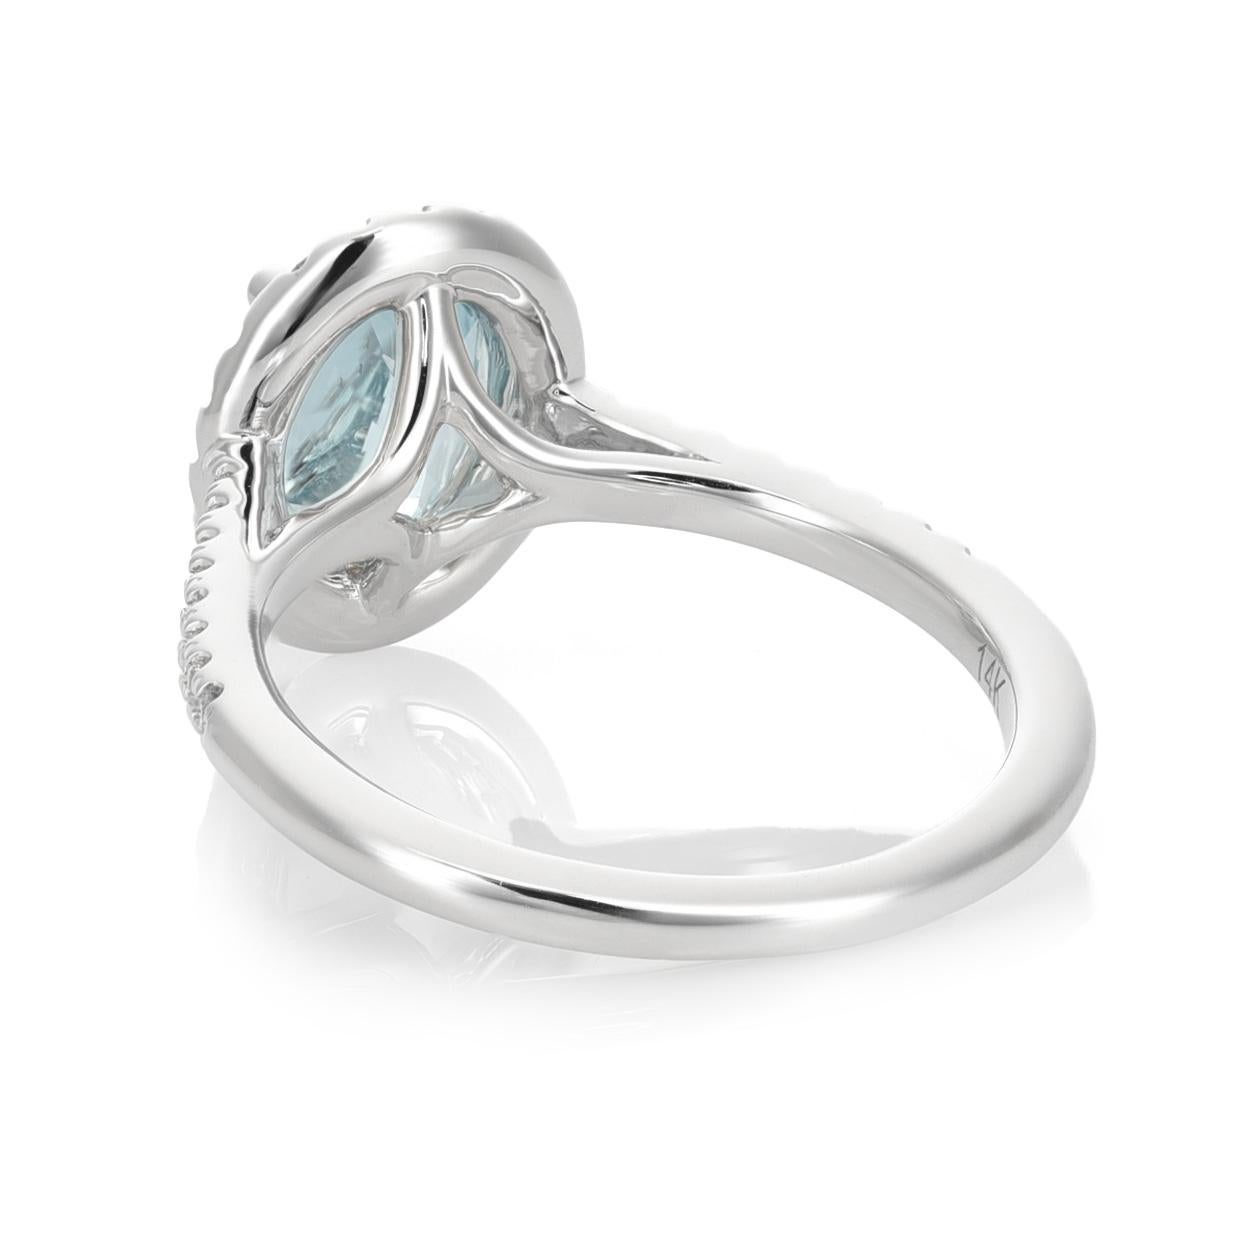 Mixed Cut 1.02 Carats Natural Aquamarine Diamonds set in 14K White Gold Ring For Sale